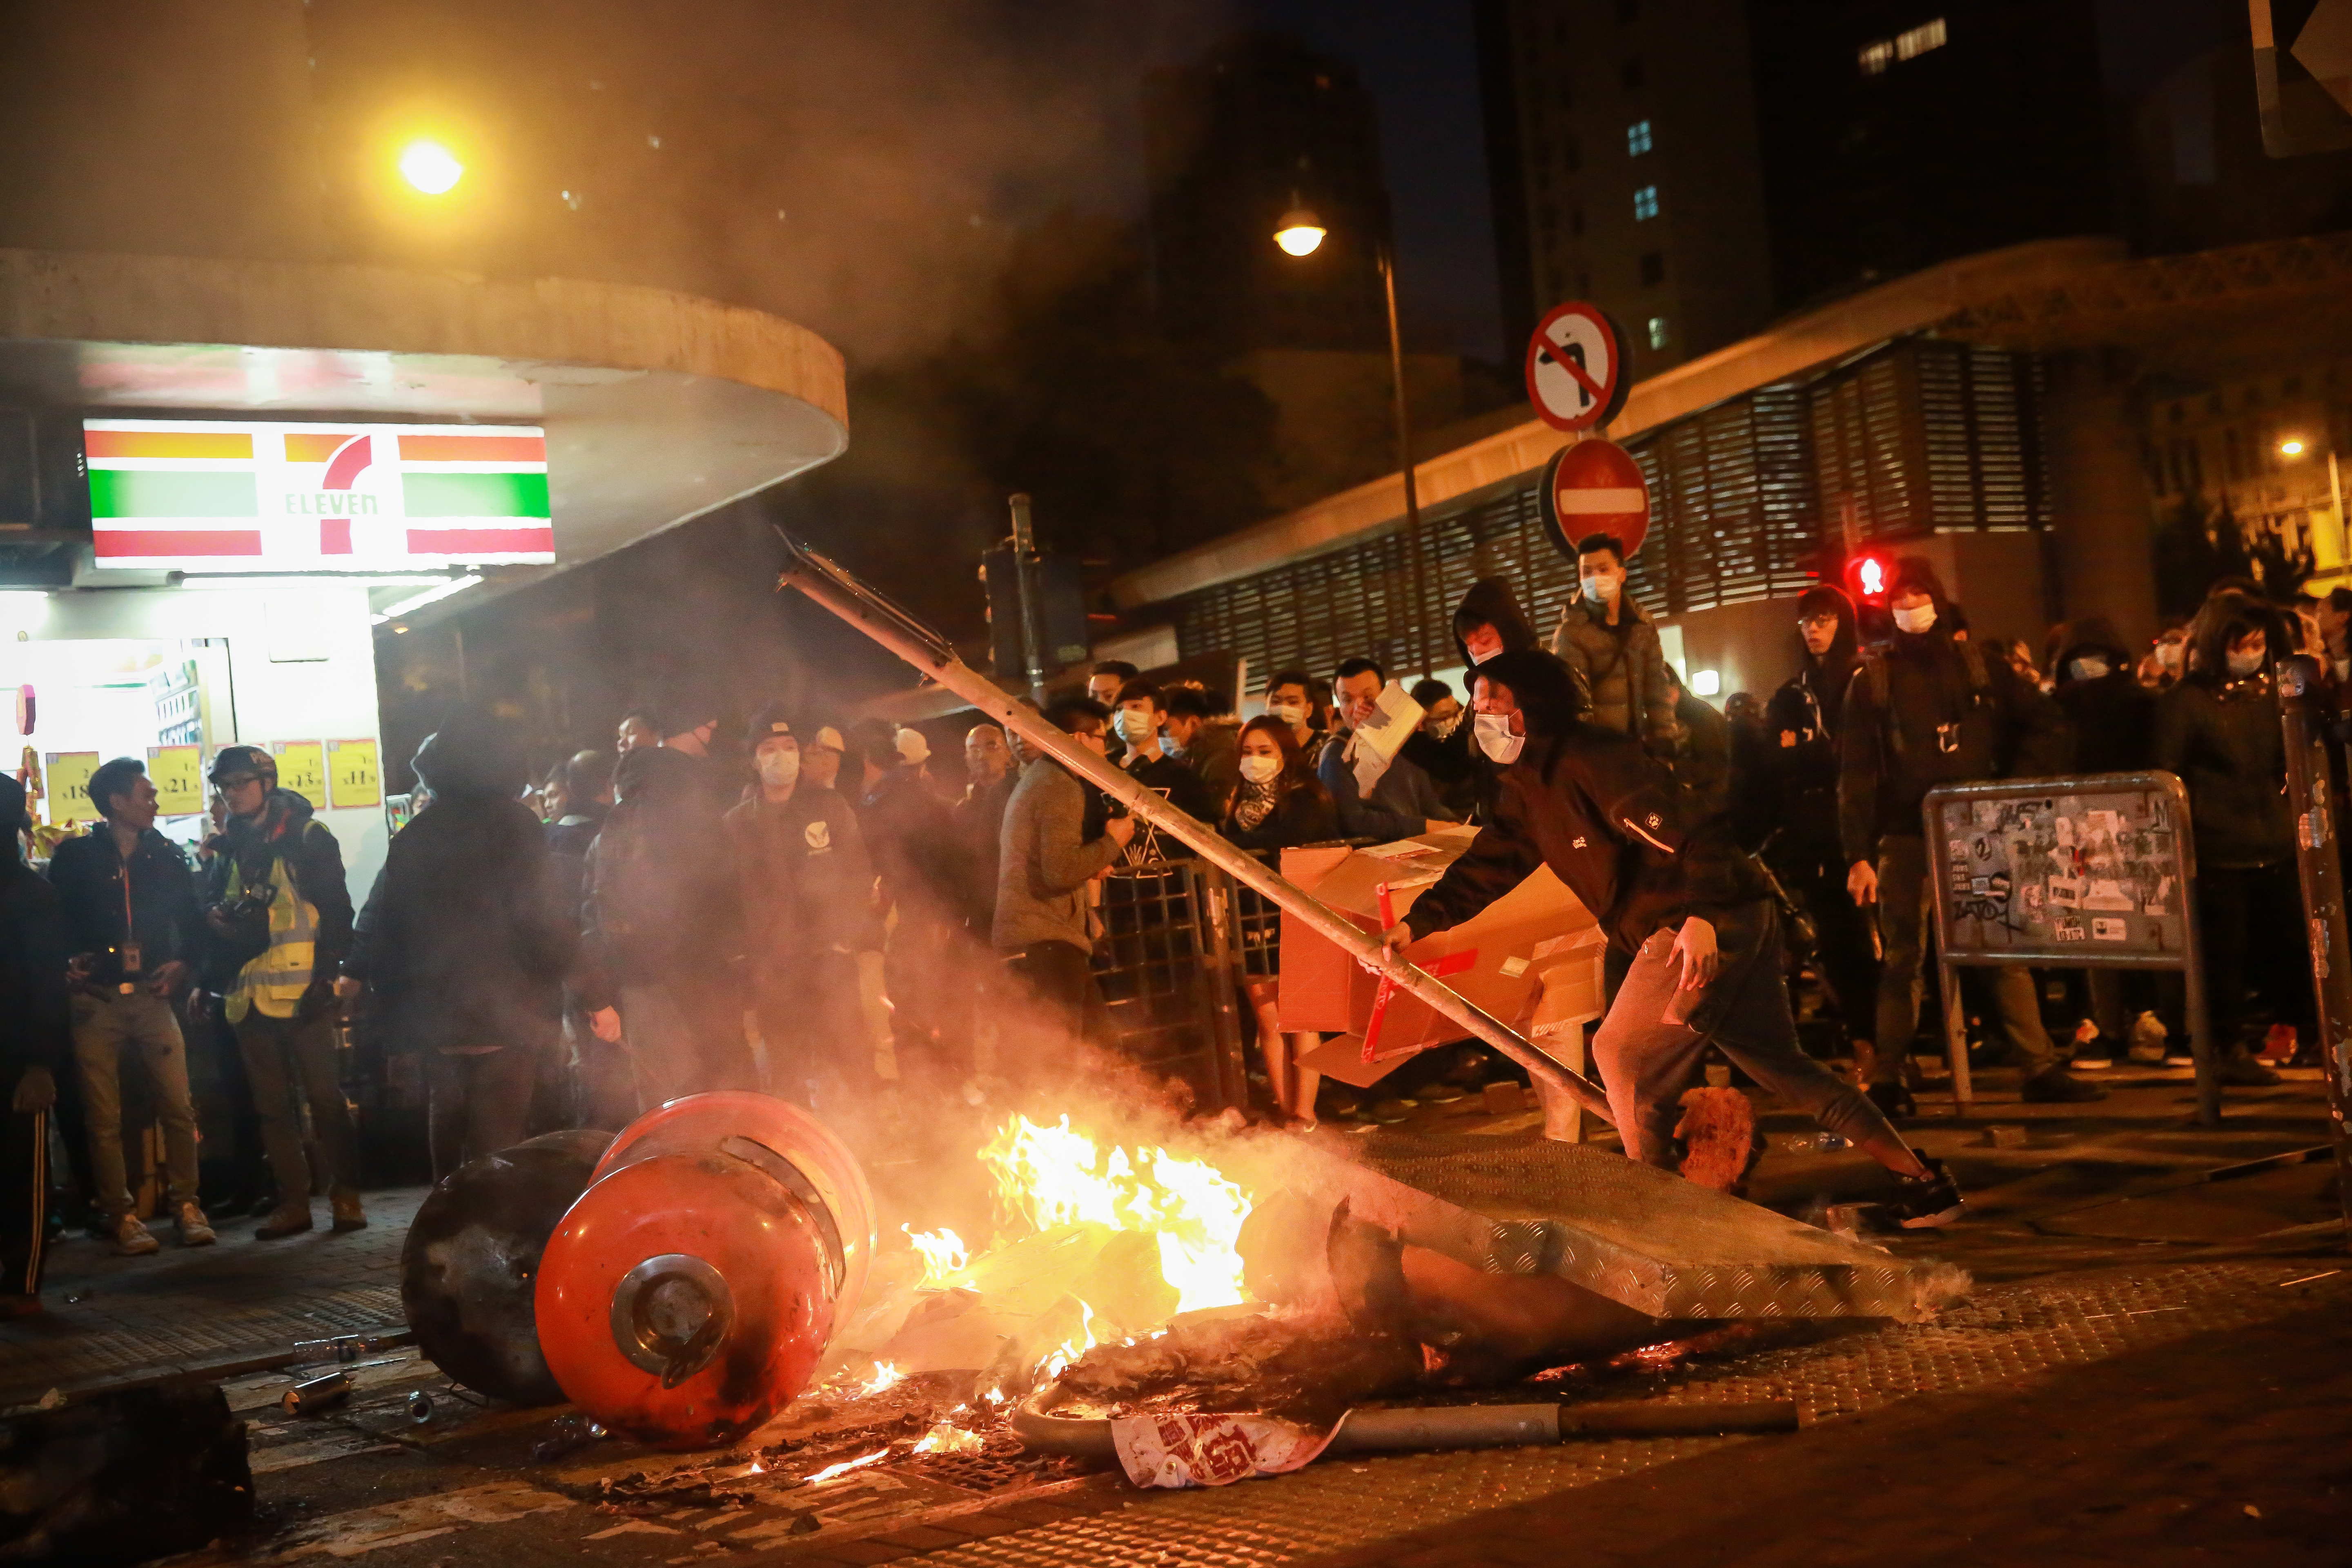 A rioter holds a lamp post as a fire burns in the Mong Kok area of Hong Kong, on Tuesday, Feb. 9, 2016. Rioters set fires and threw bricks at police in Hong Kong early Tuesday, injuring officers and shuttering one of the city's busiest subway stations in a clash over illegal food stalls during the three-day Chinese New Year holiday. Photographer: Billy H.C. Kwok/Bloomberg ORG XMIT: 604115421